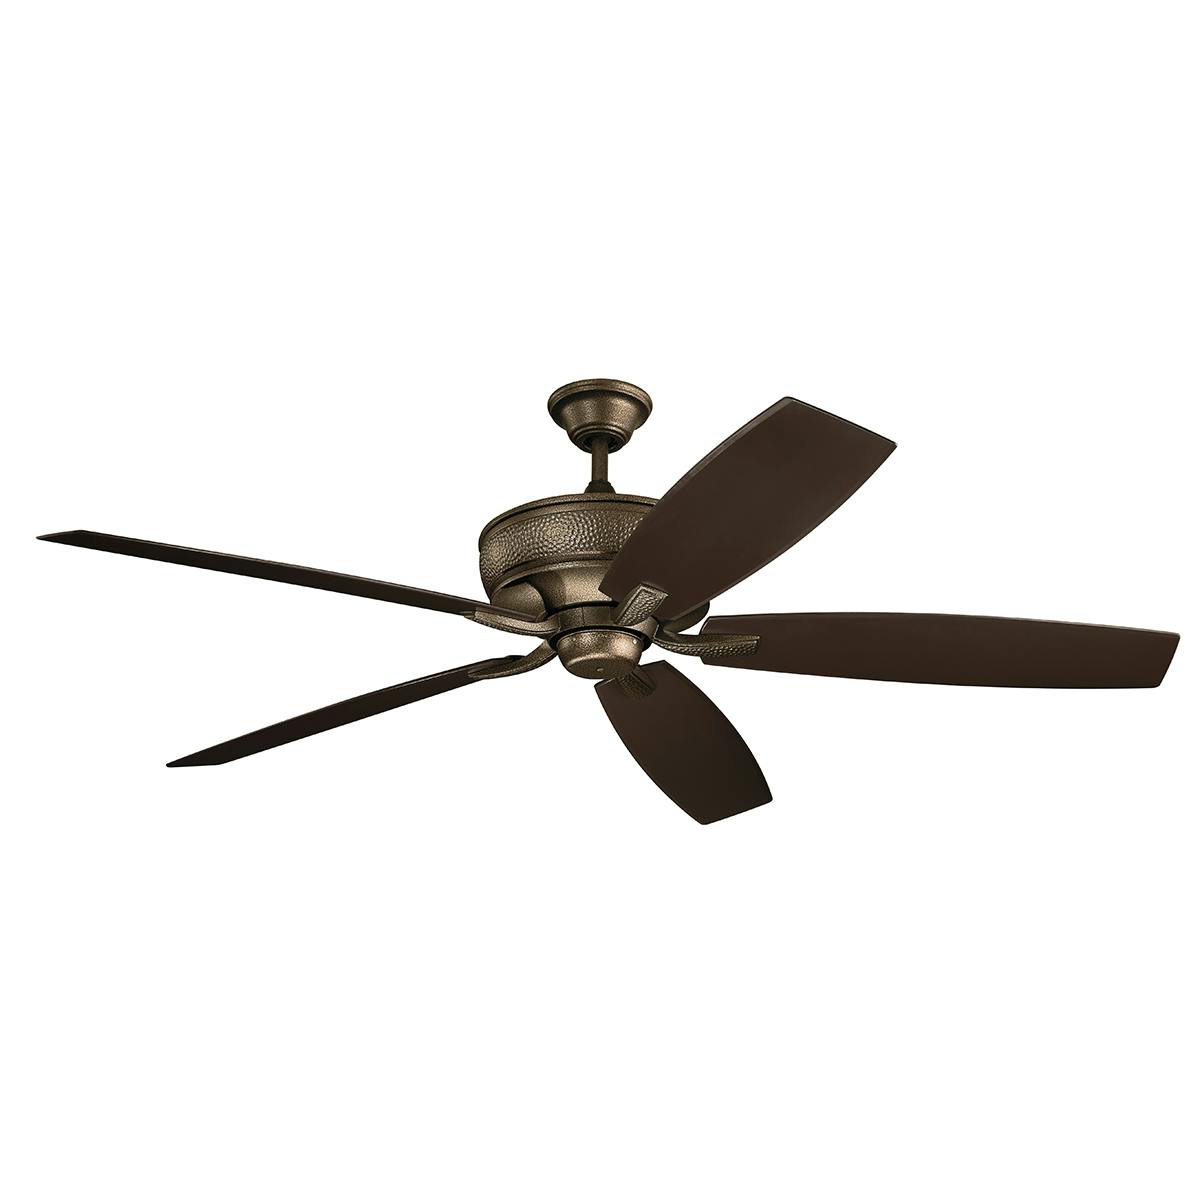 Monarch Patio 70" Fan in Weathered Copper on a white background